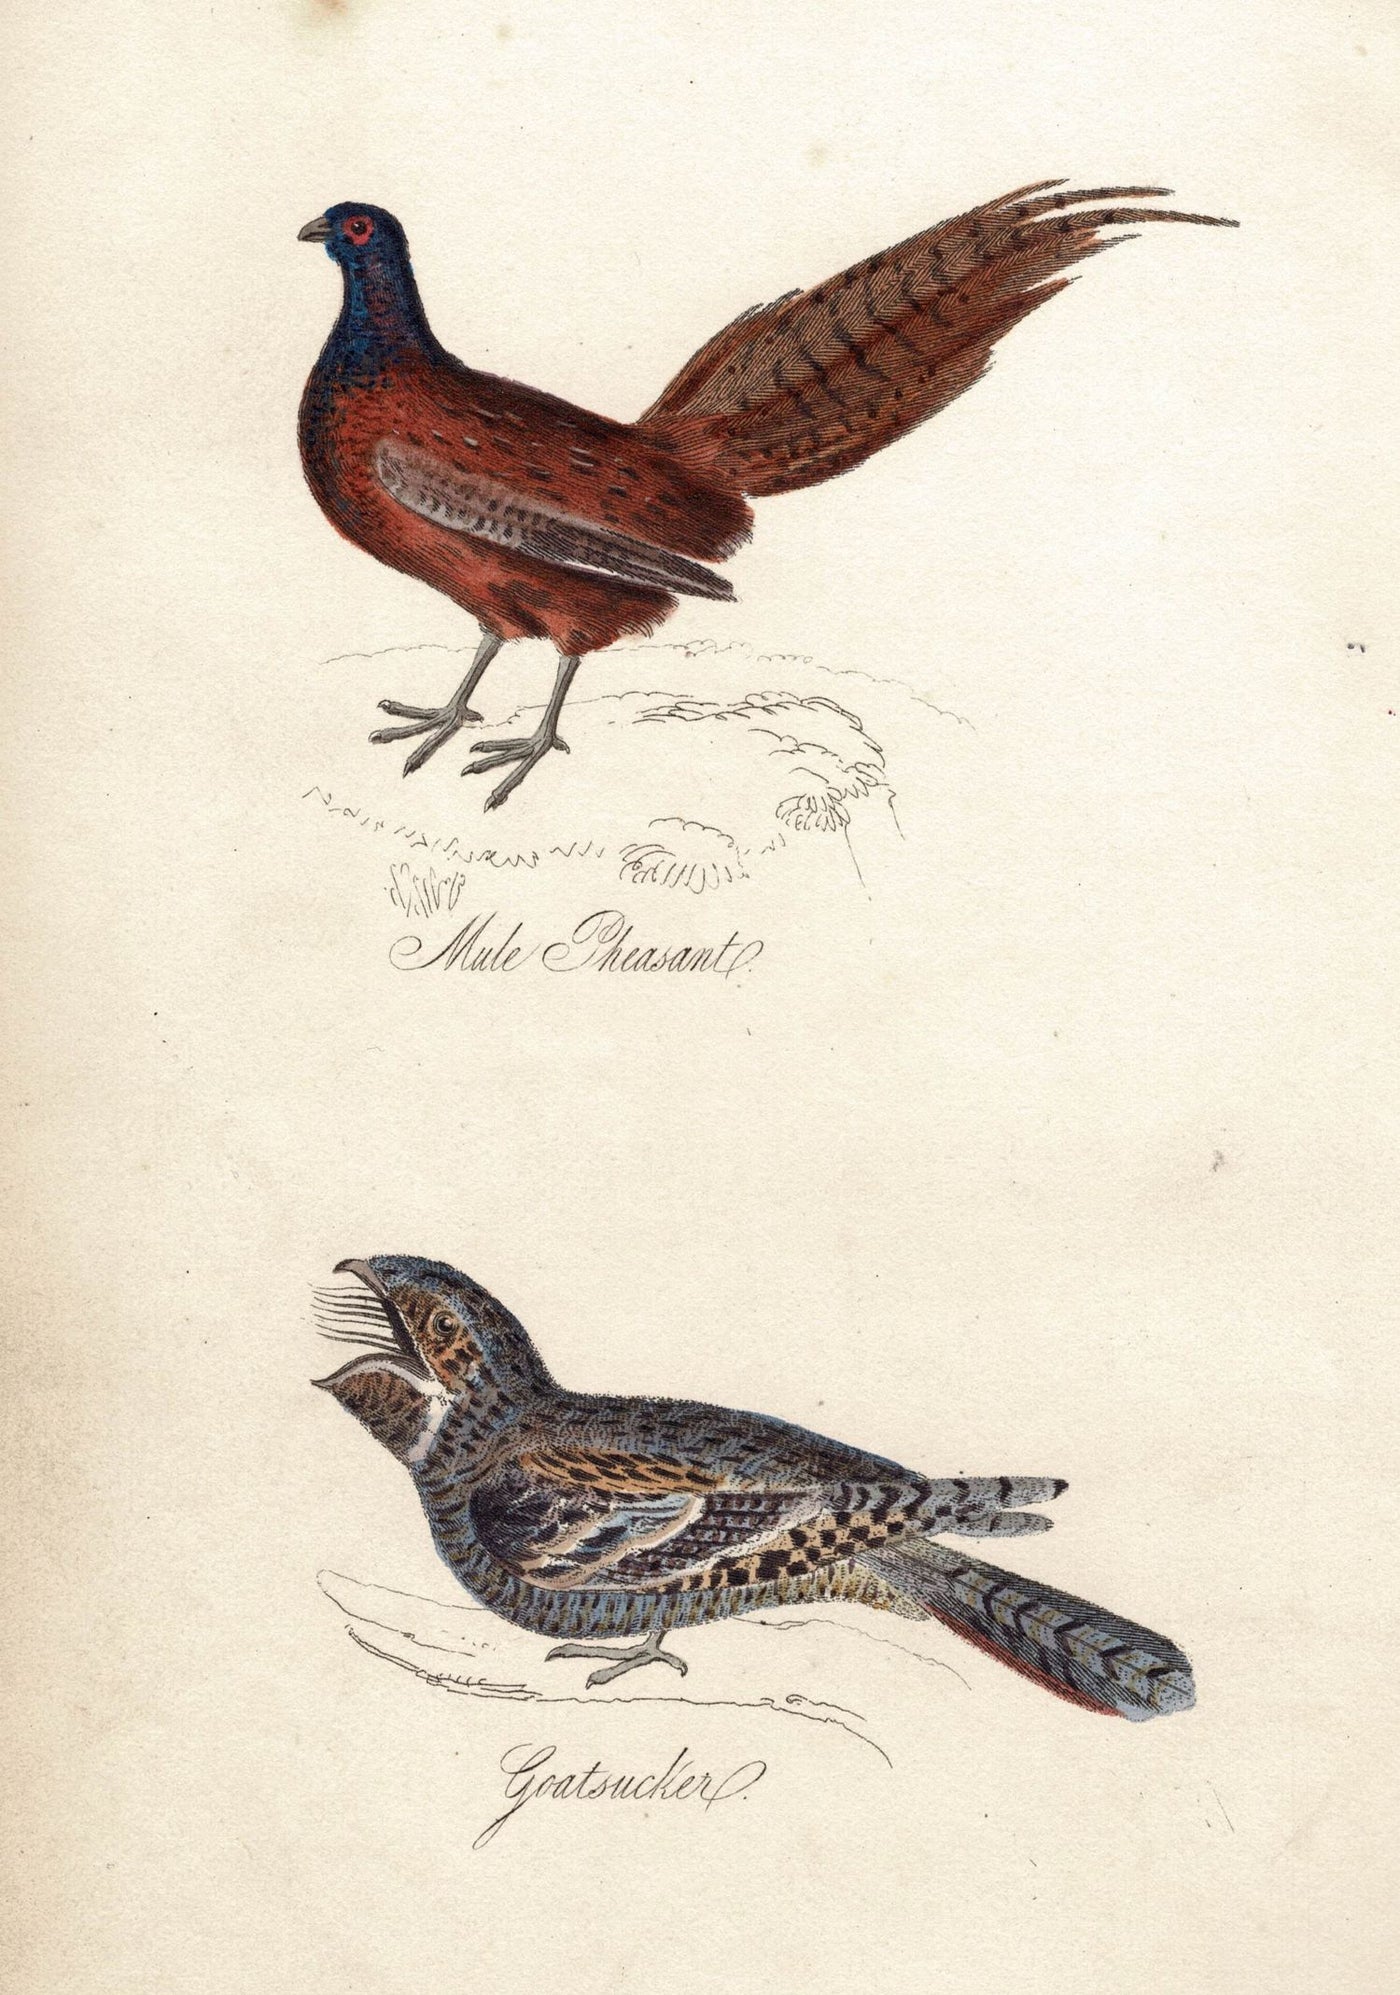 Mule Pheasant and goatsucker antique print published in 1834